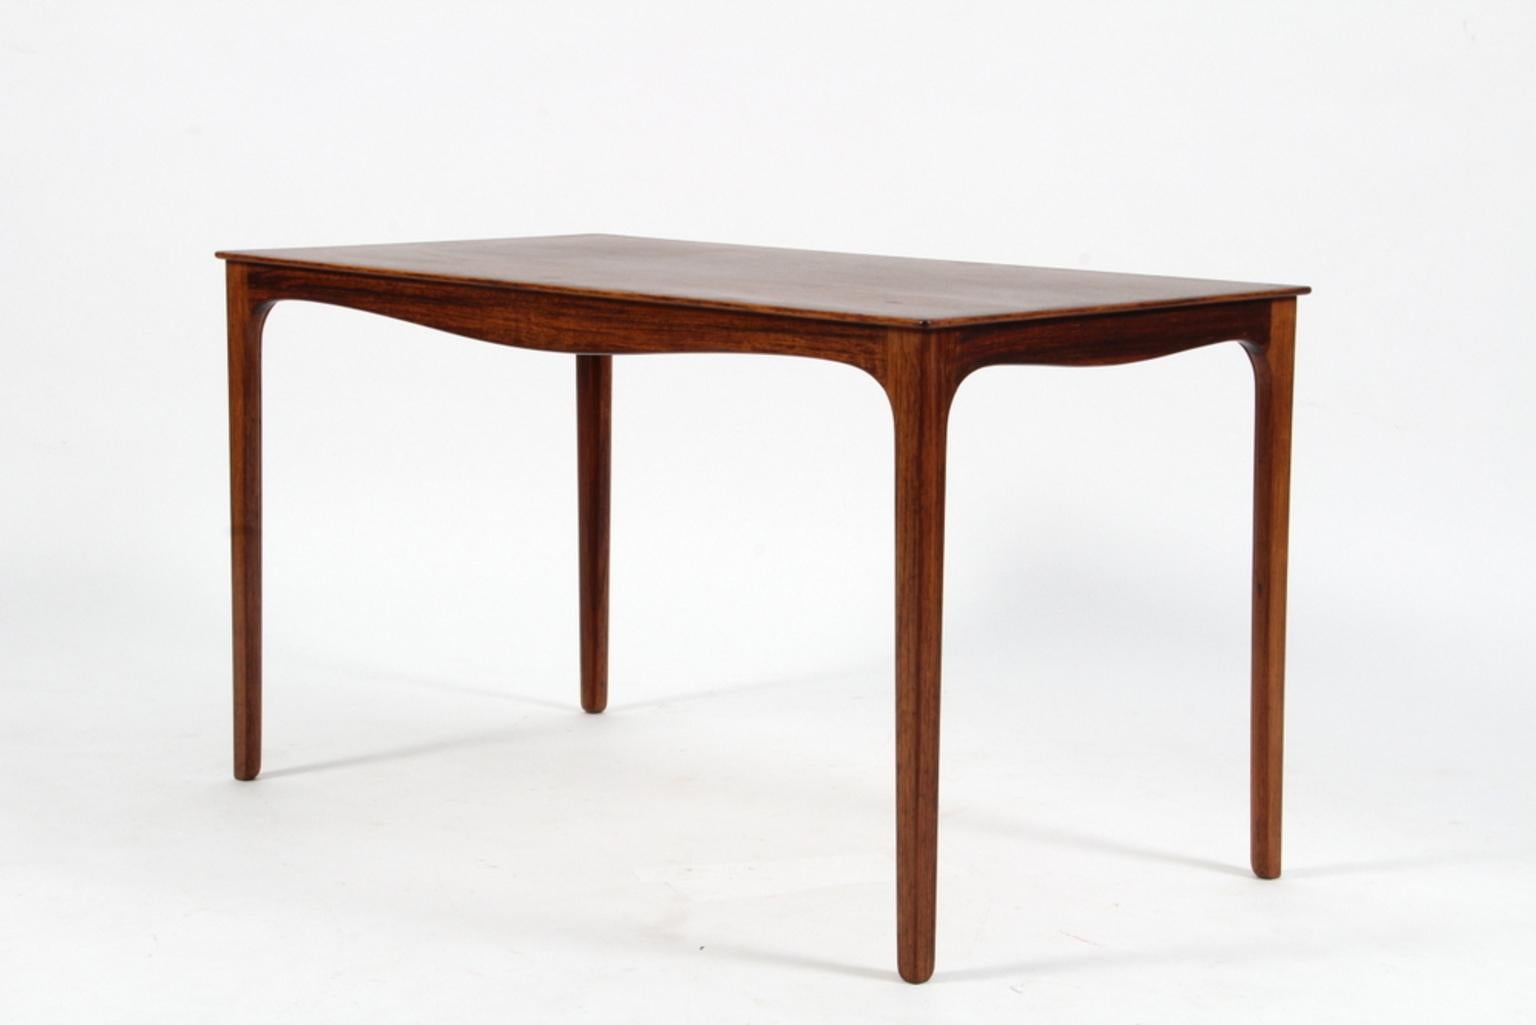 Ole Wanscher coffee table of rosewood.

Made by A. J. Iversen.

